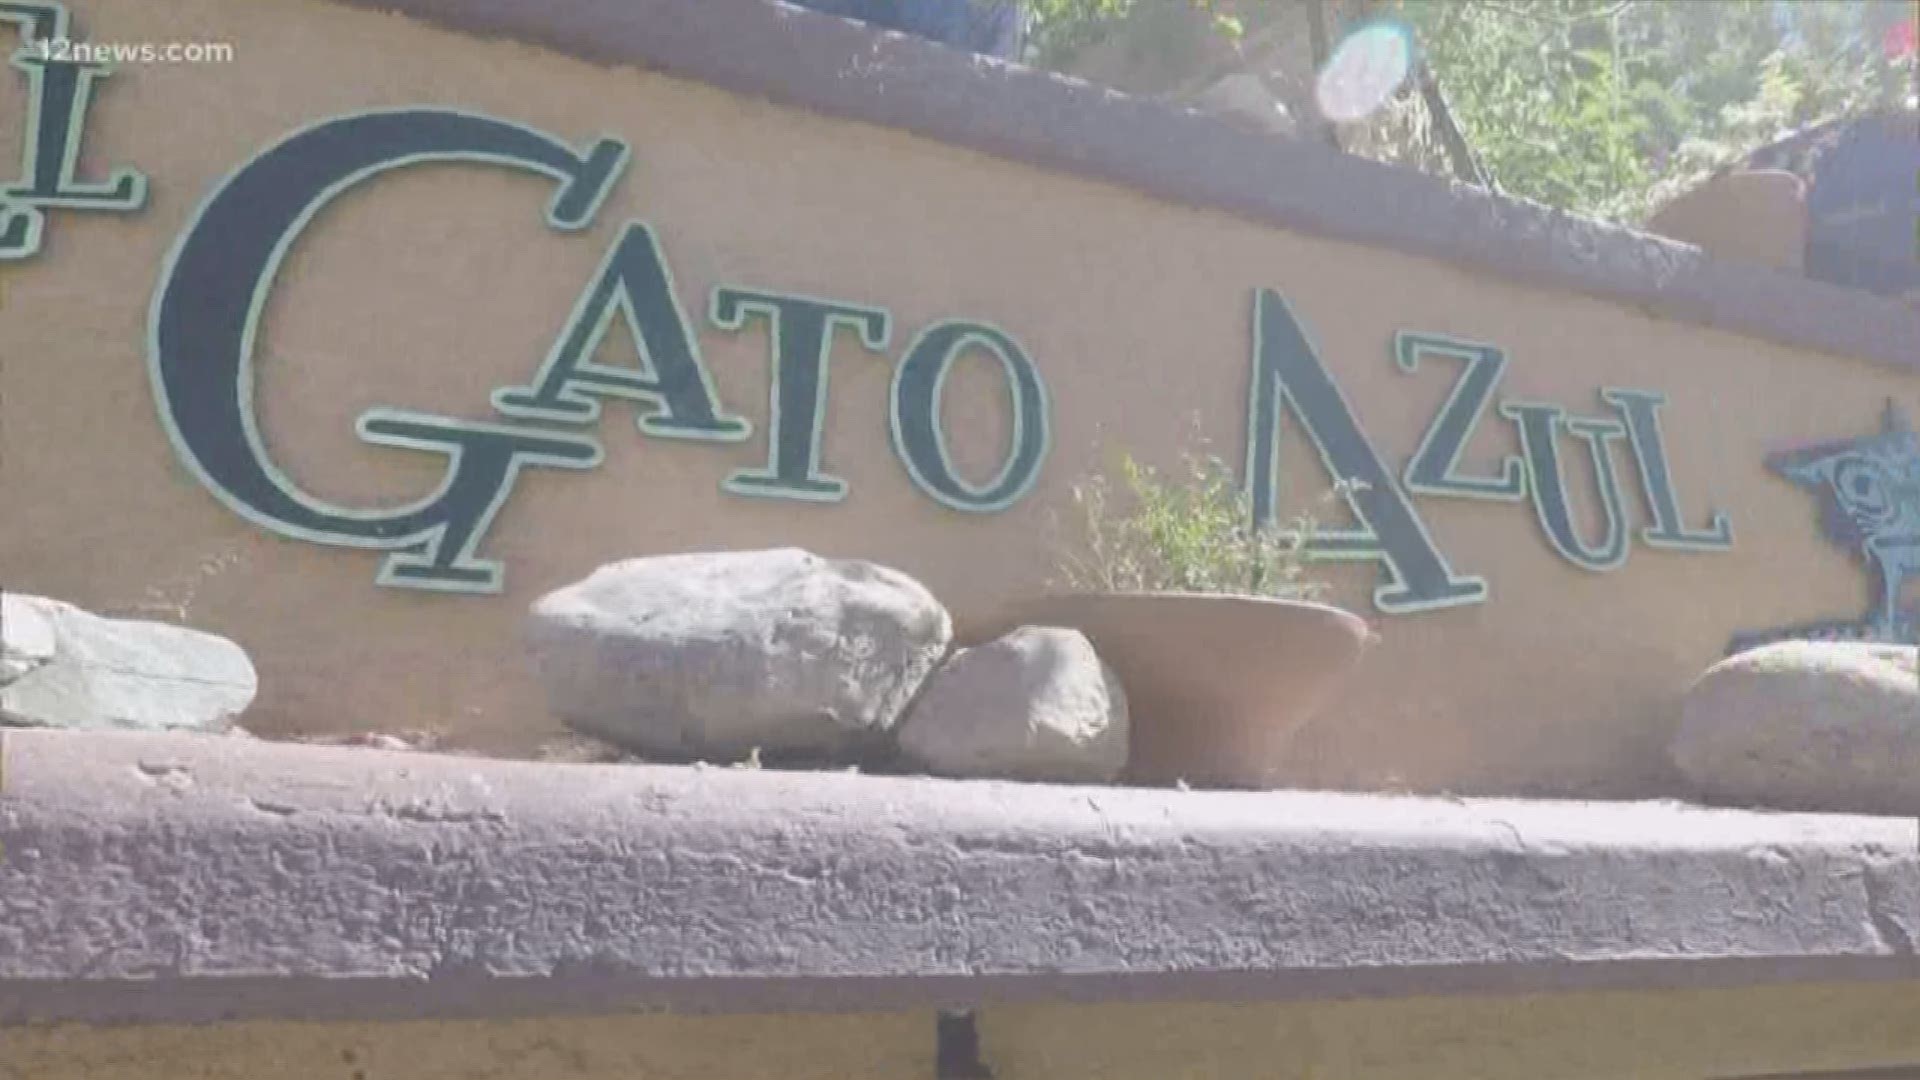 Just a short walk across the Granite Creek, you'll find a restaurant that will make your taste buds purr: El Gato Azul.